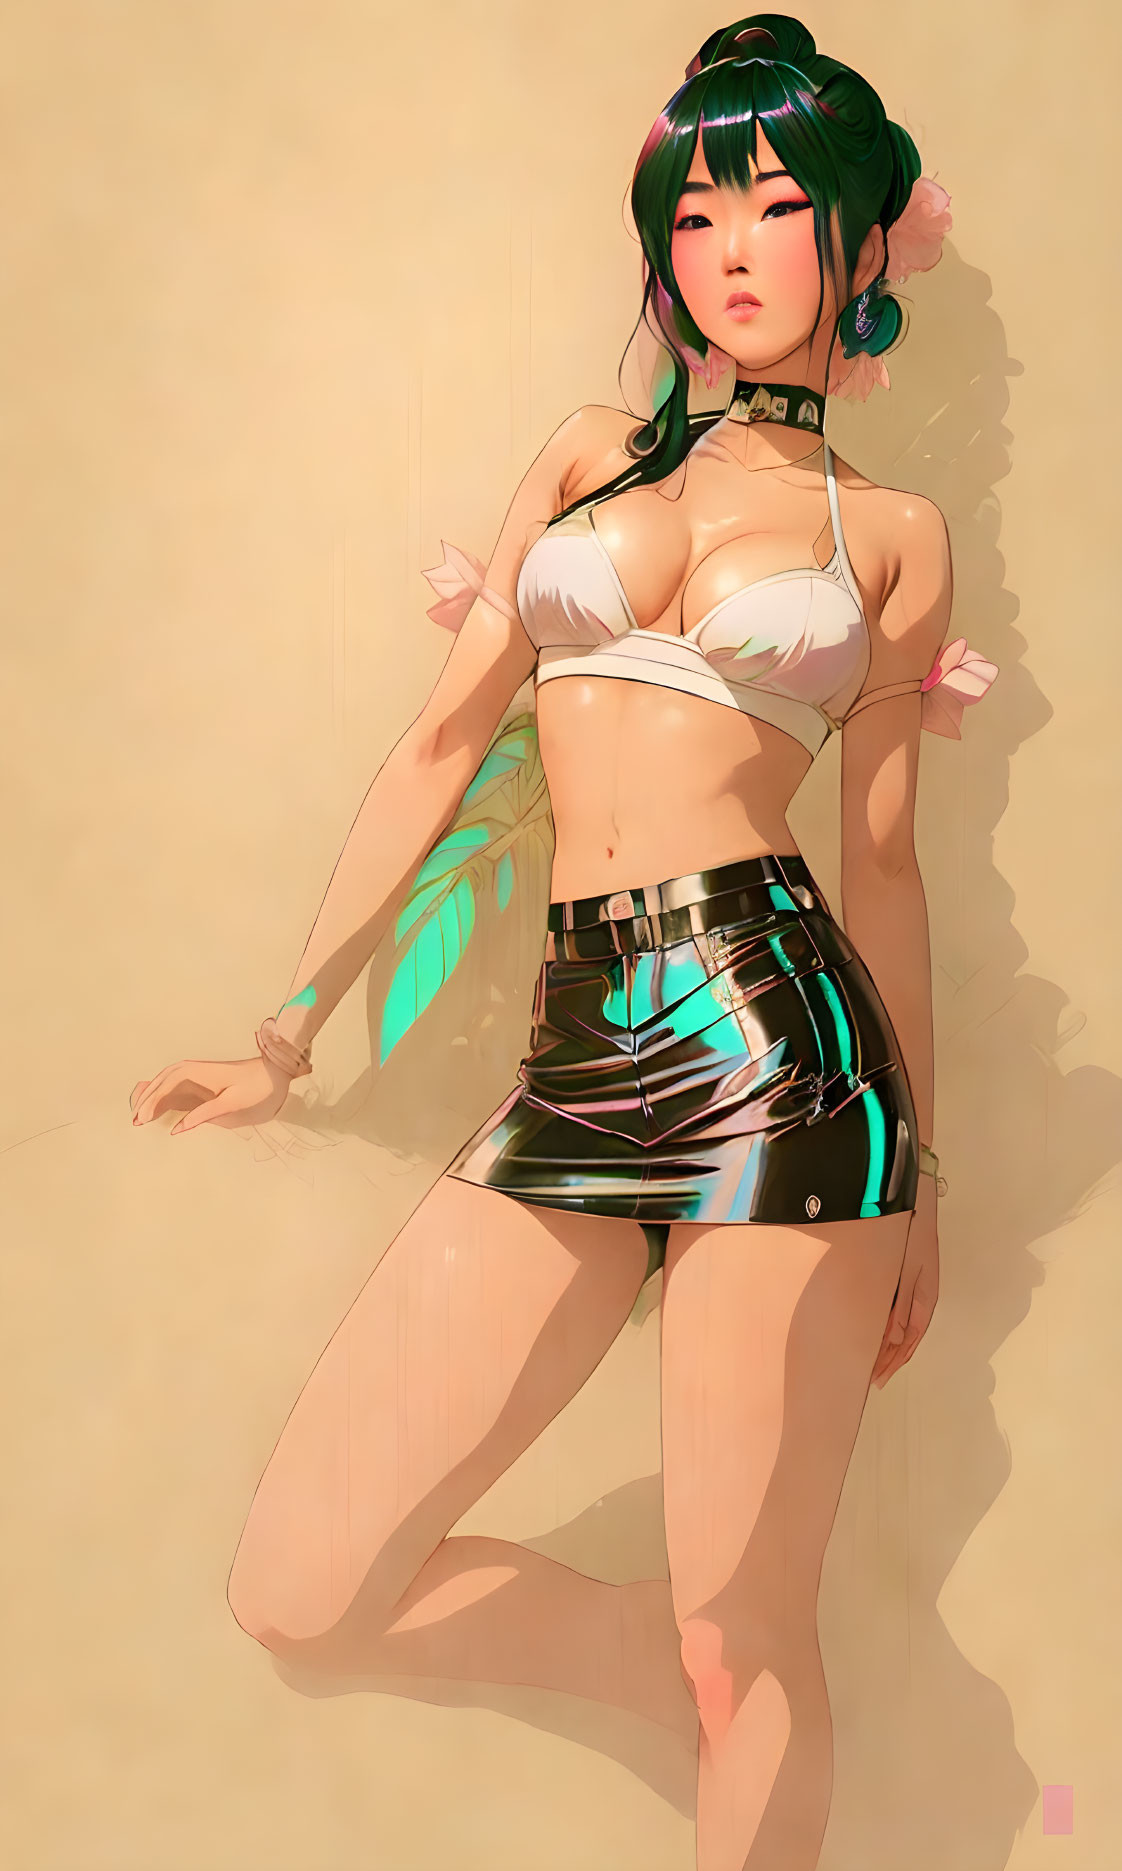 Woman with Green Hair in White Crop Top and Holographic Skirt on Tan Background